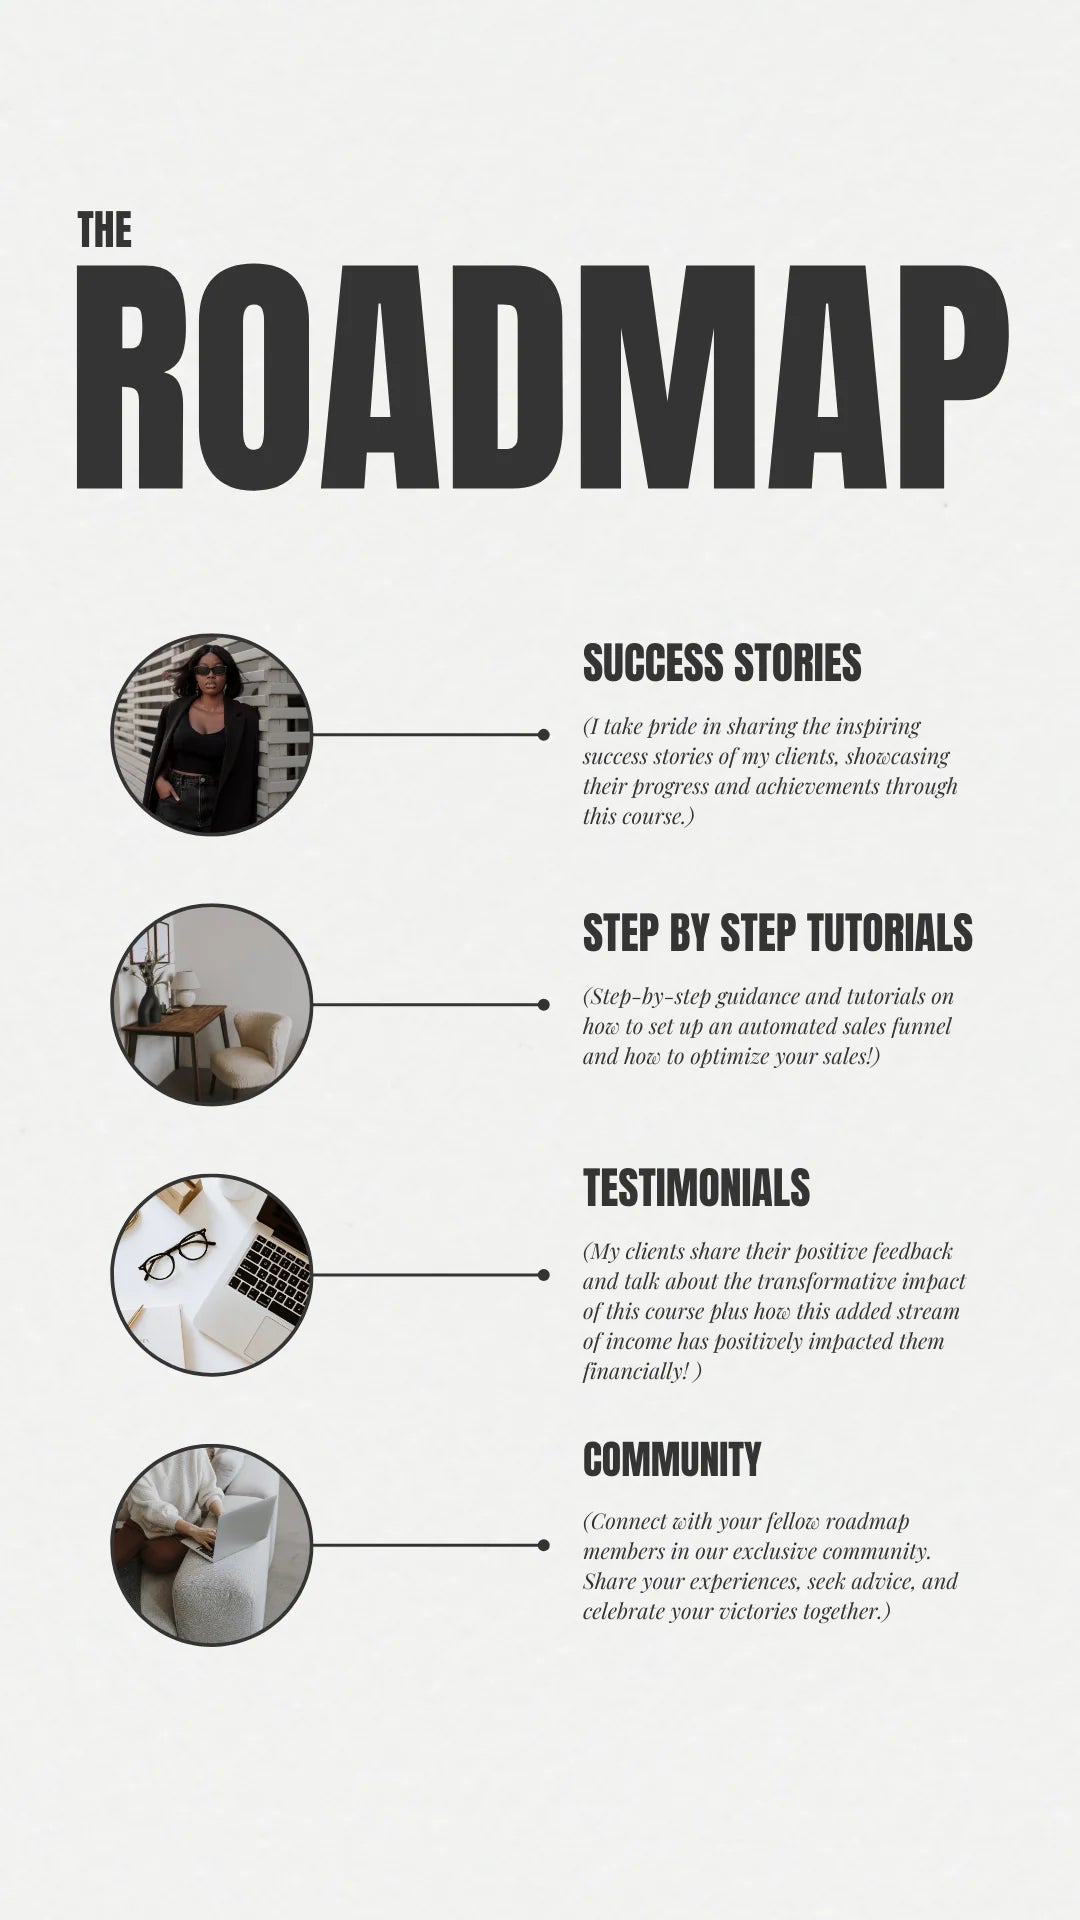 The Roadmap 3.0 | Roadmap to Riches Digital Marketing Course with 100% Master Resell Rights (MRR)